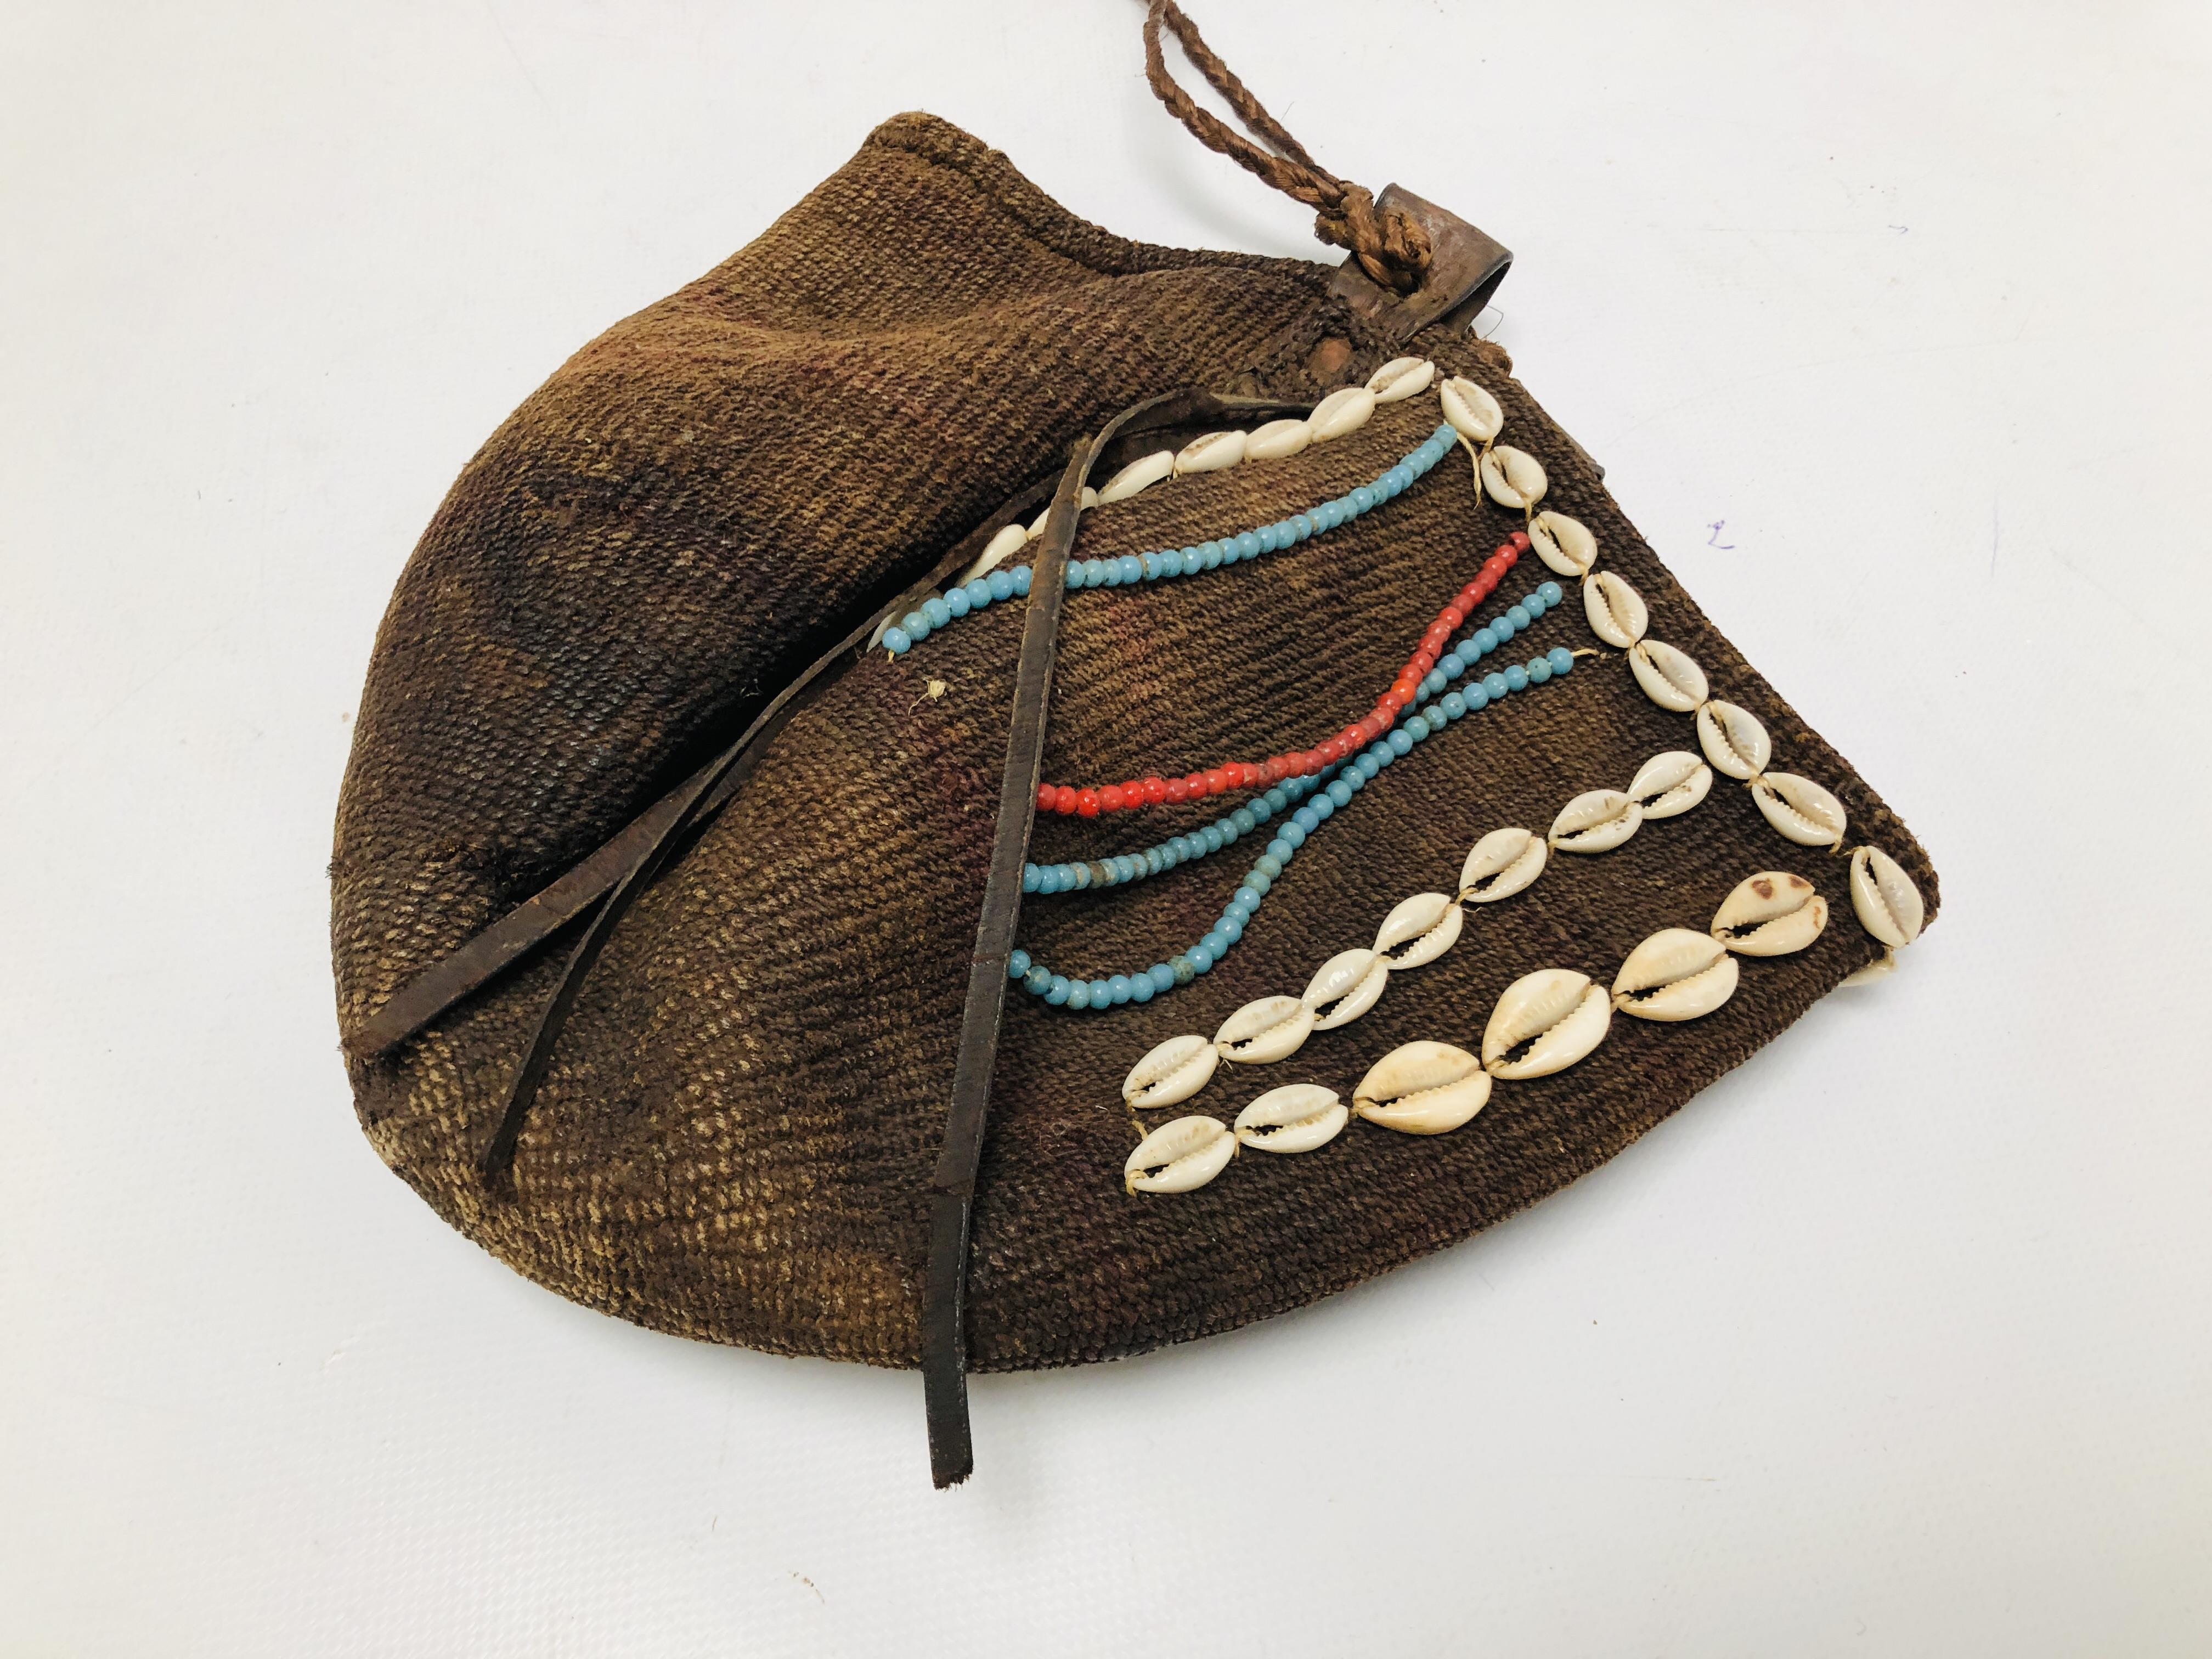 AN AFRICAN KIKUYU BAG APPLIED WITH COWRIE SHELLS AND BEADS - Image 2 of 8